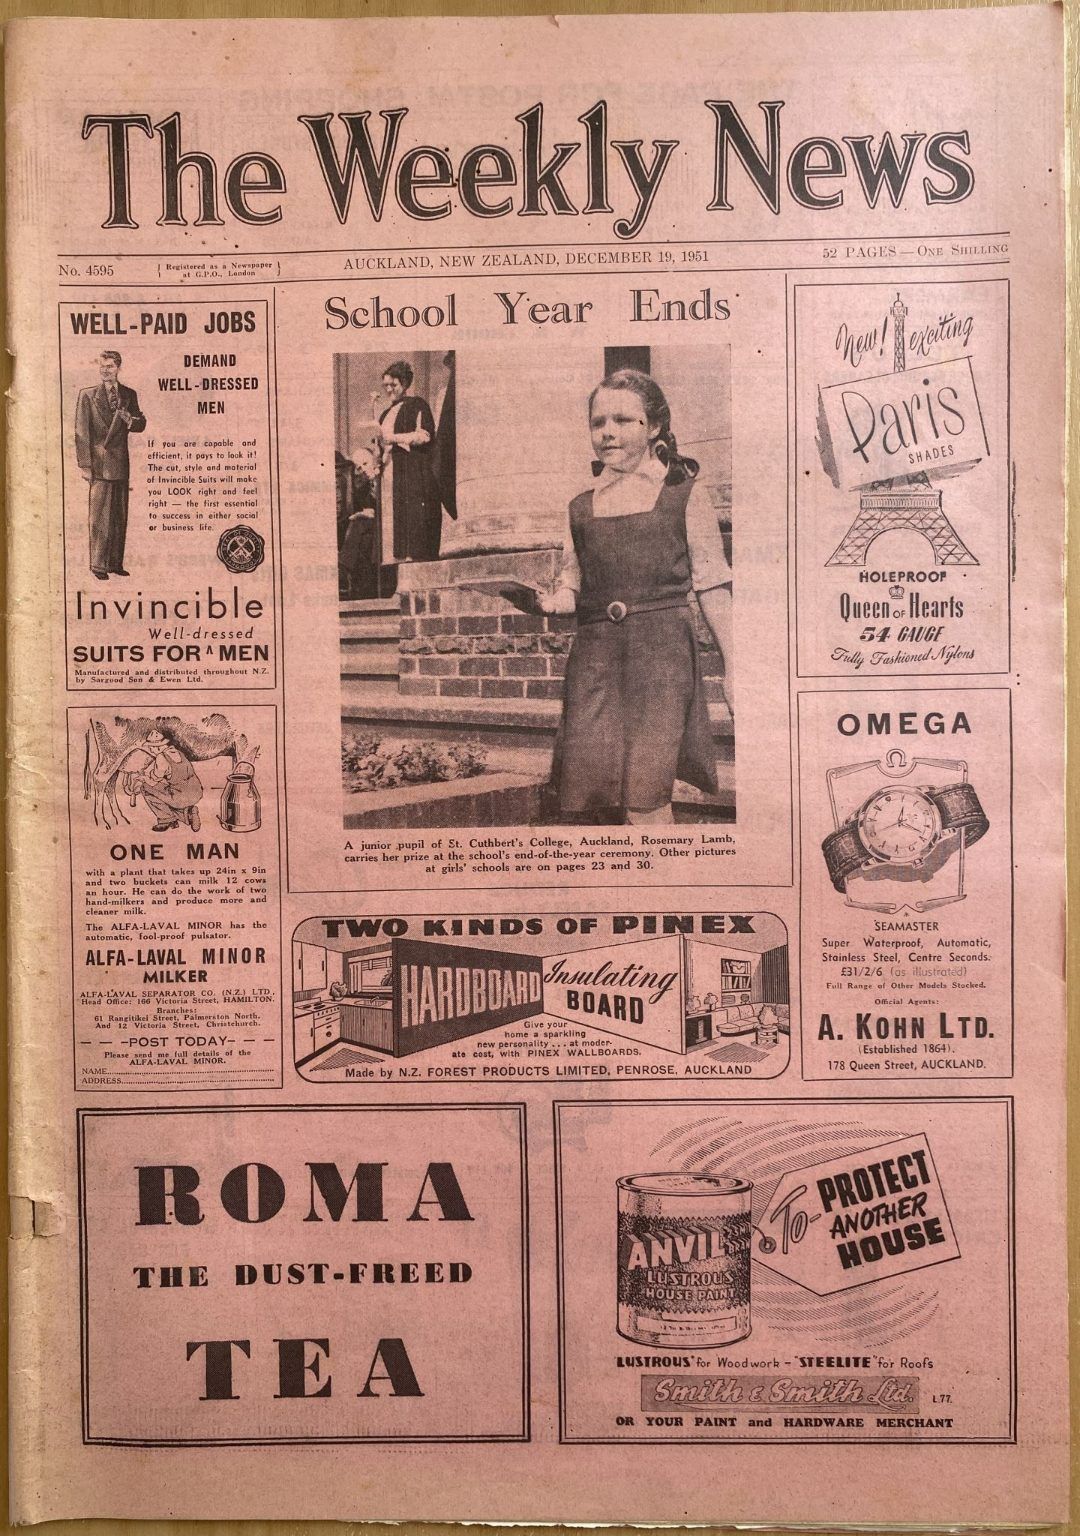 OLD NEWSPAPER: The Weekly News, No. 4595, 19 December 1951